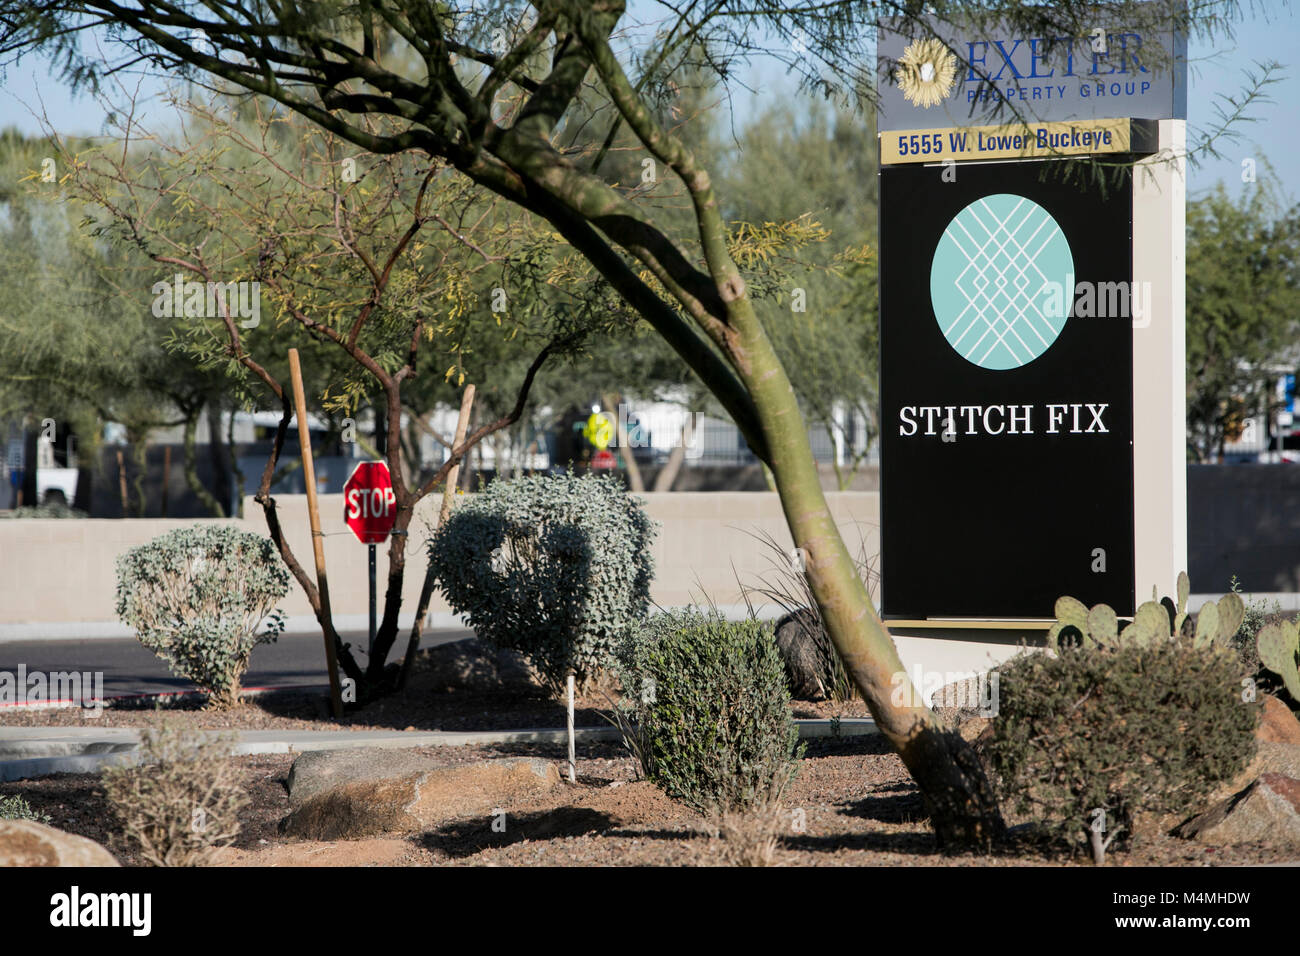 A logo sign outside of a facility occupied by Stitch Fix in Phoenix, Arizona, on February 3, 2018. Stock Photo